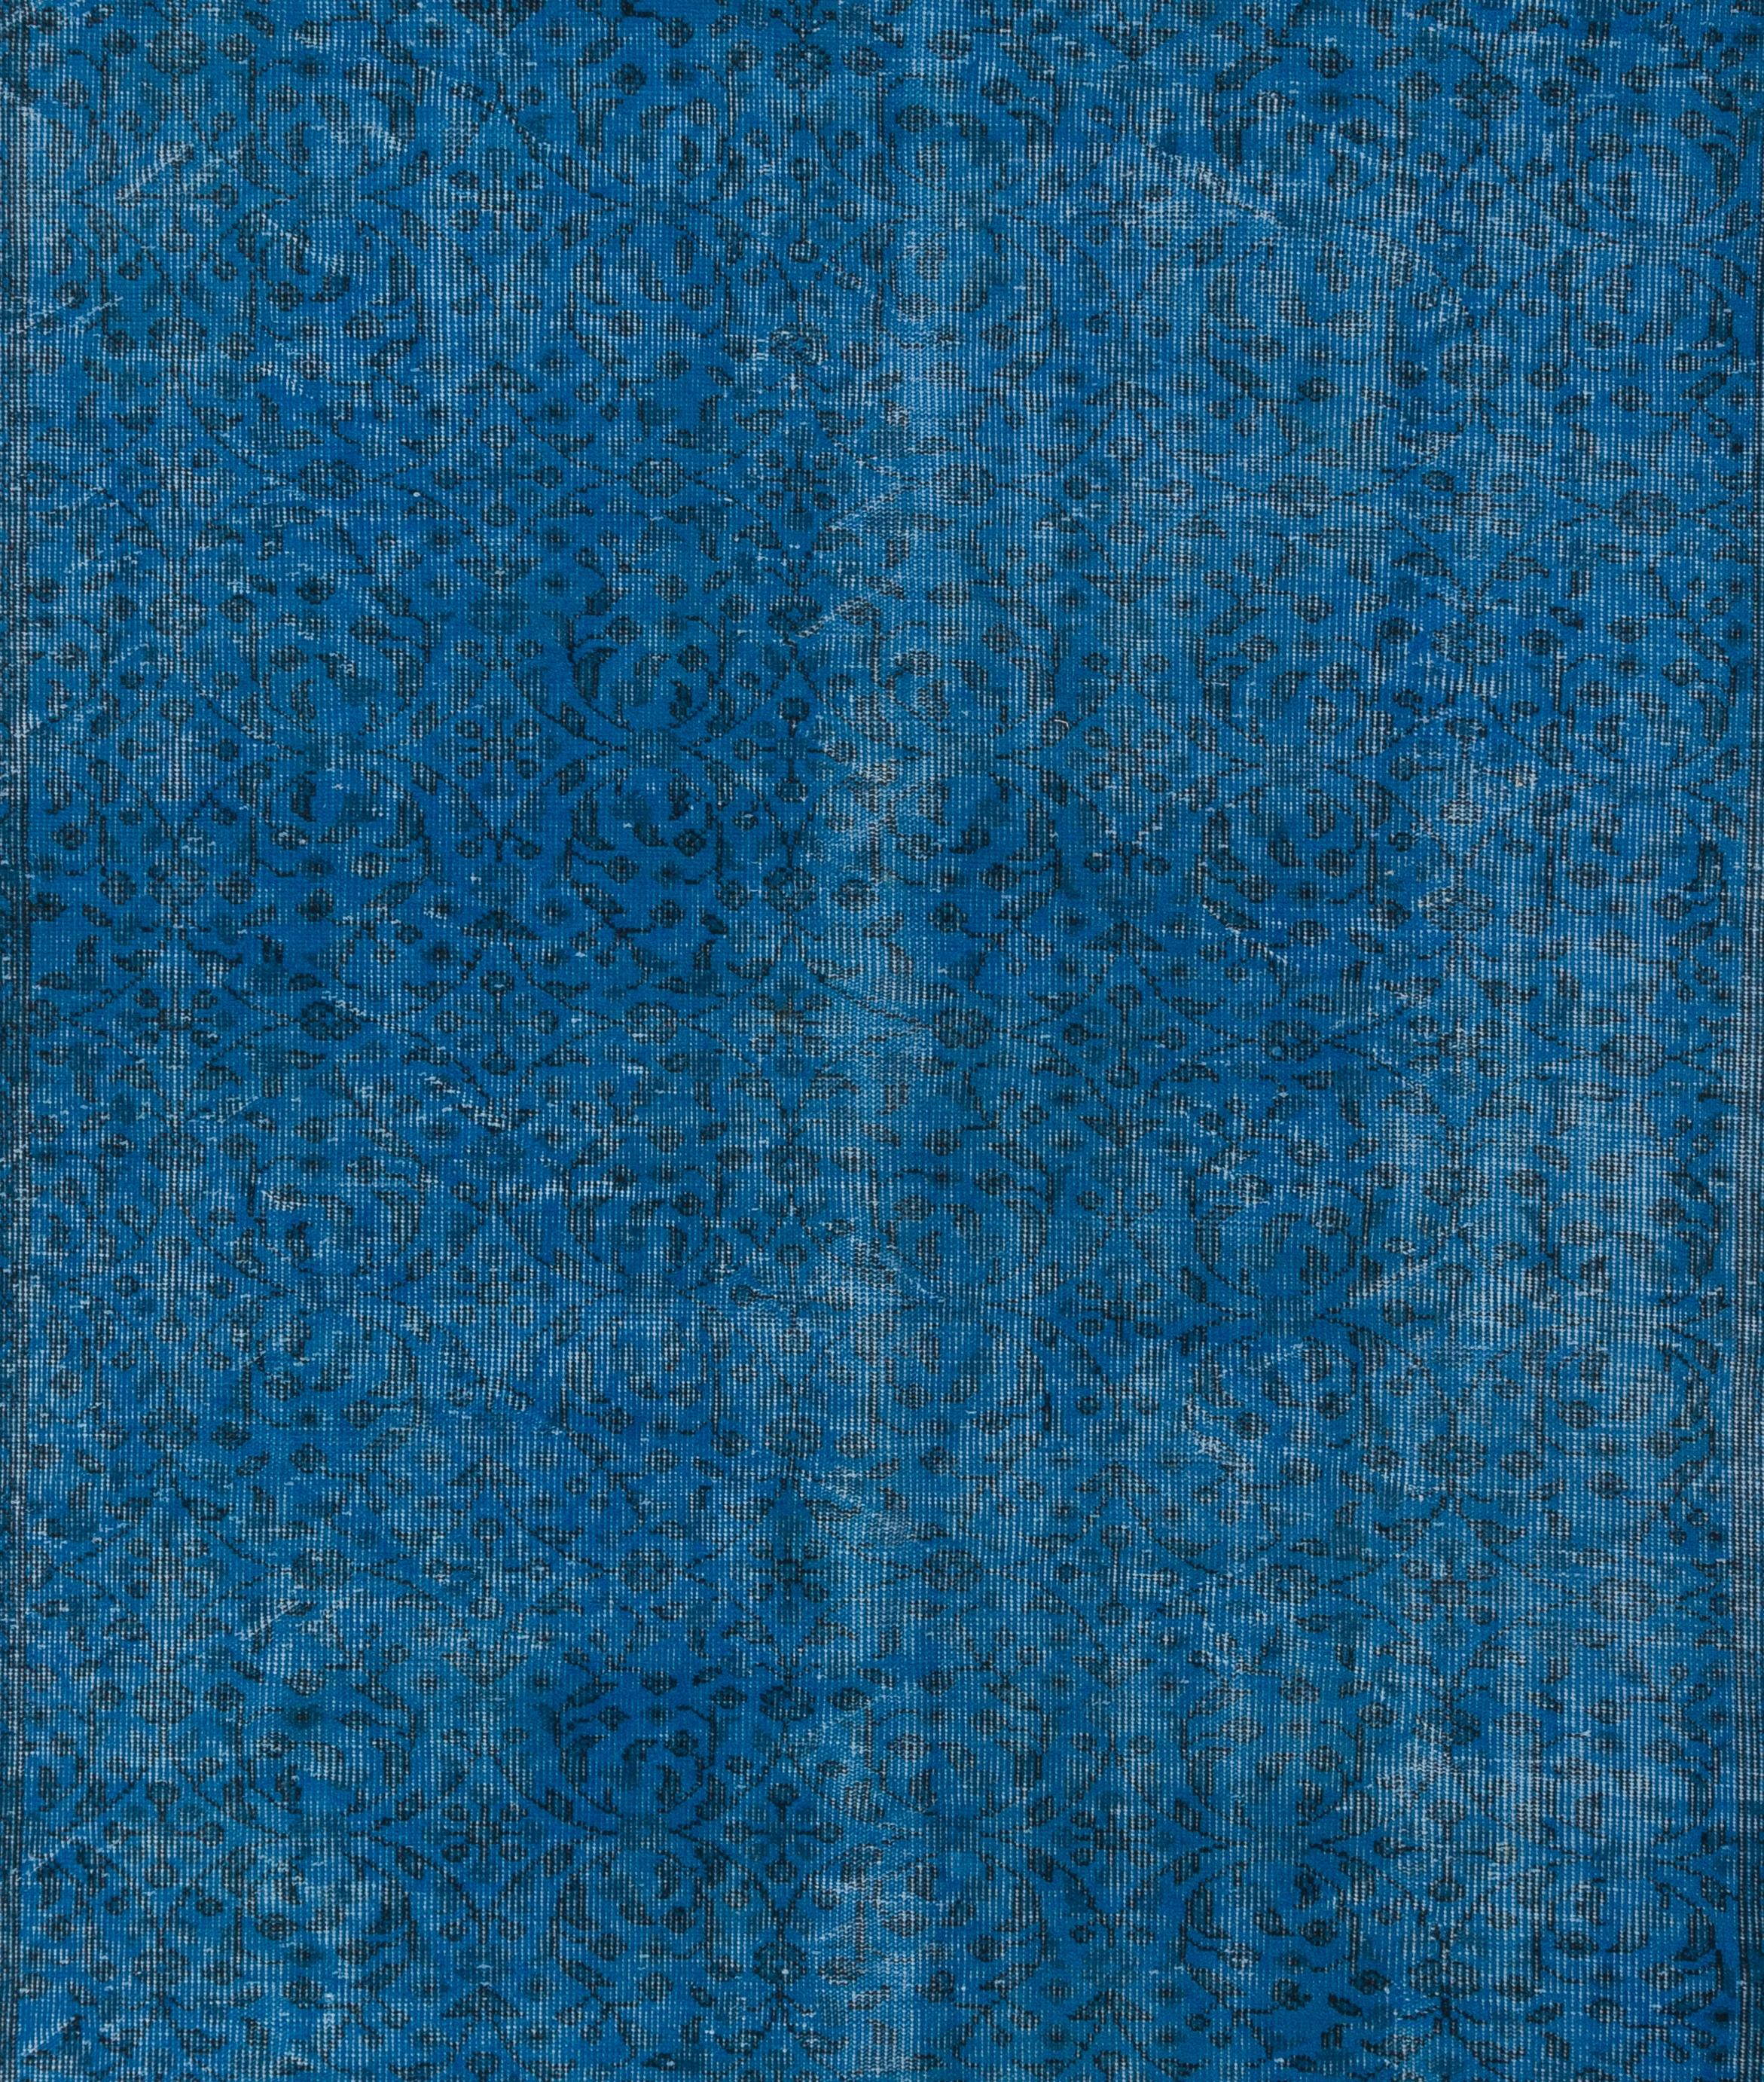 Hand-Woven 6x9 Ft Vintage Turkish Rug ReDyed in Blue Color. Great 4 Contemporary Interiors